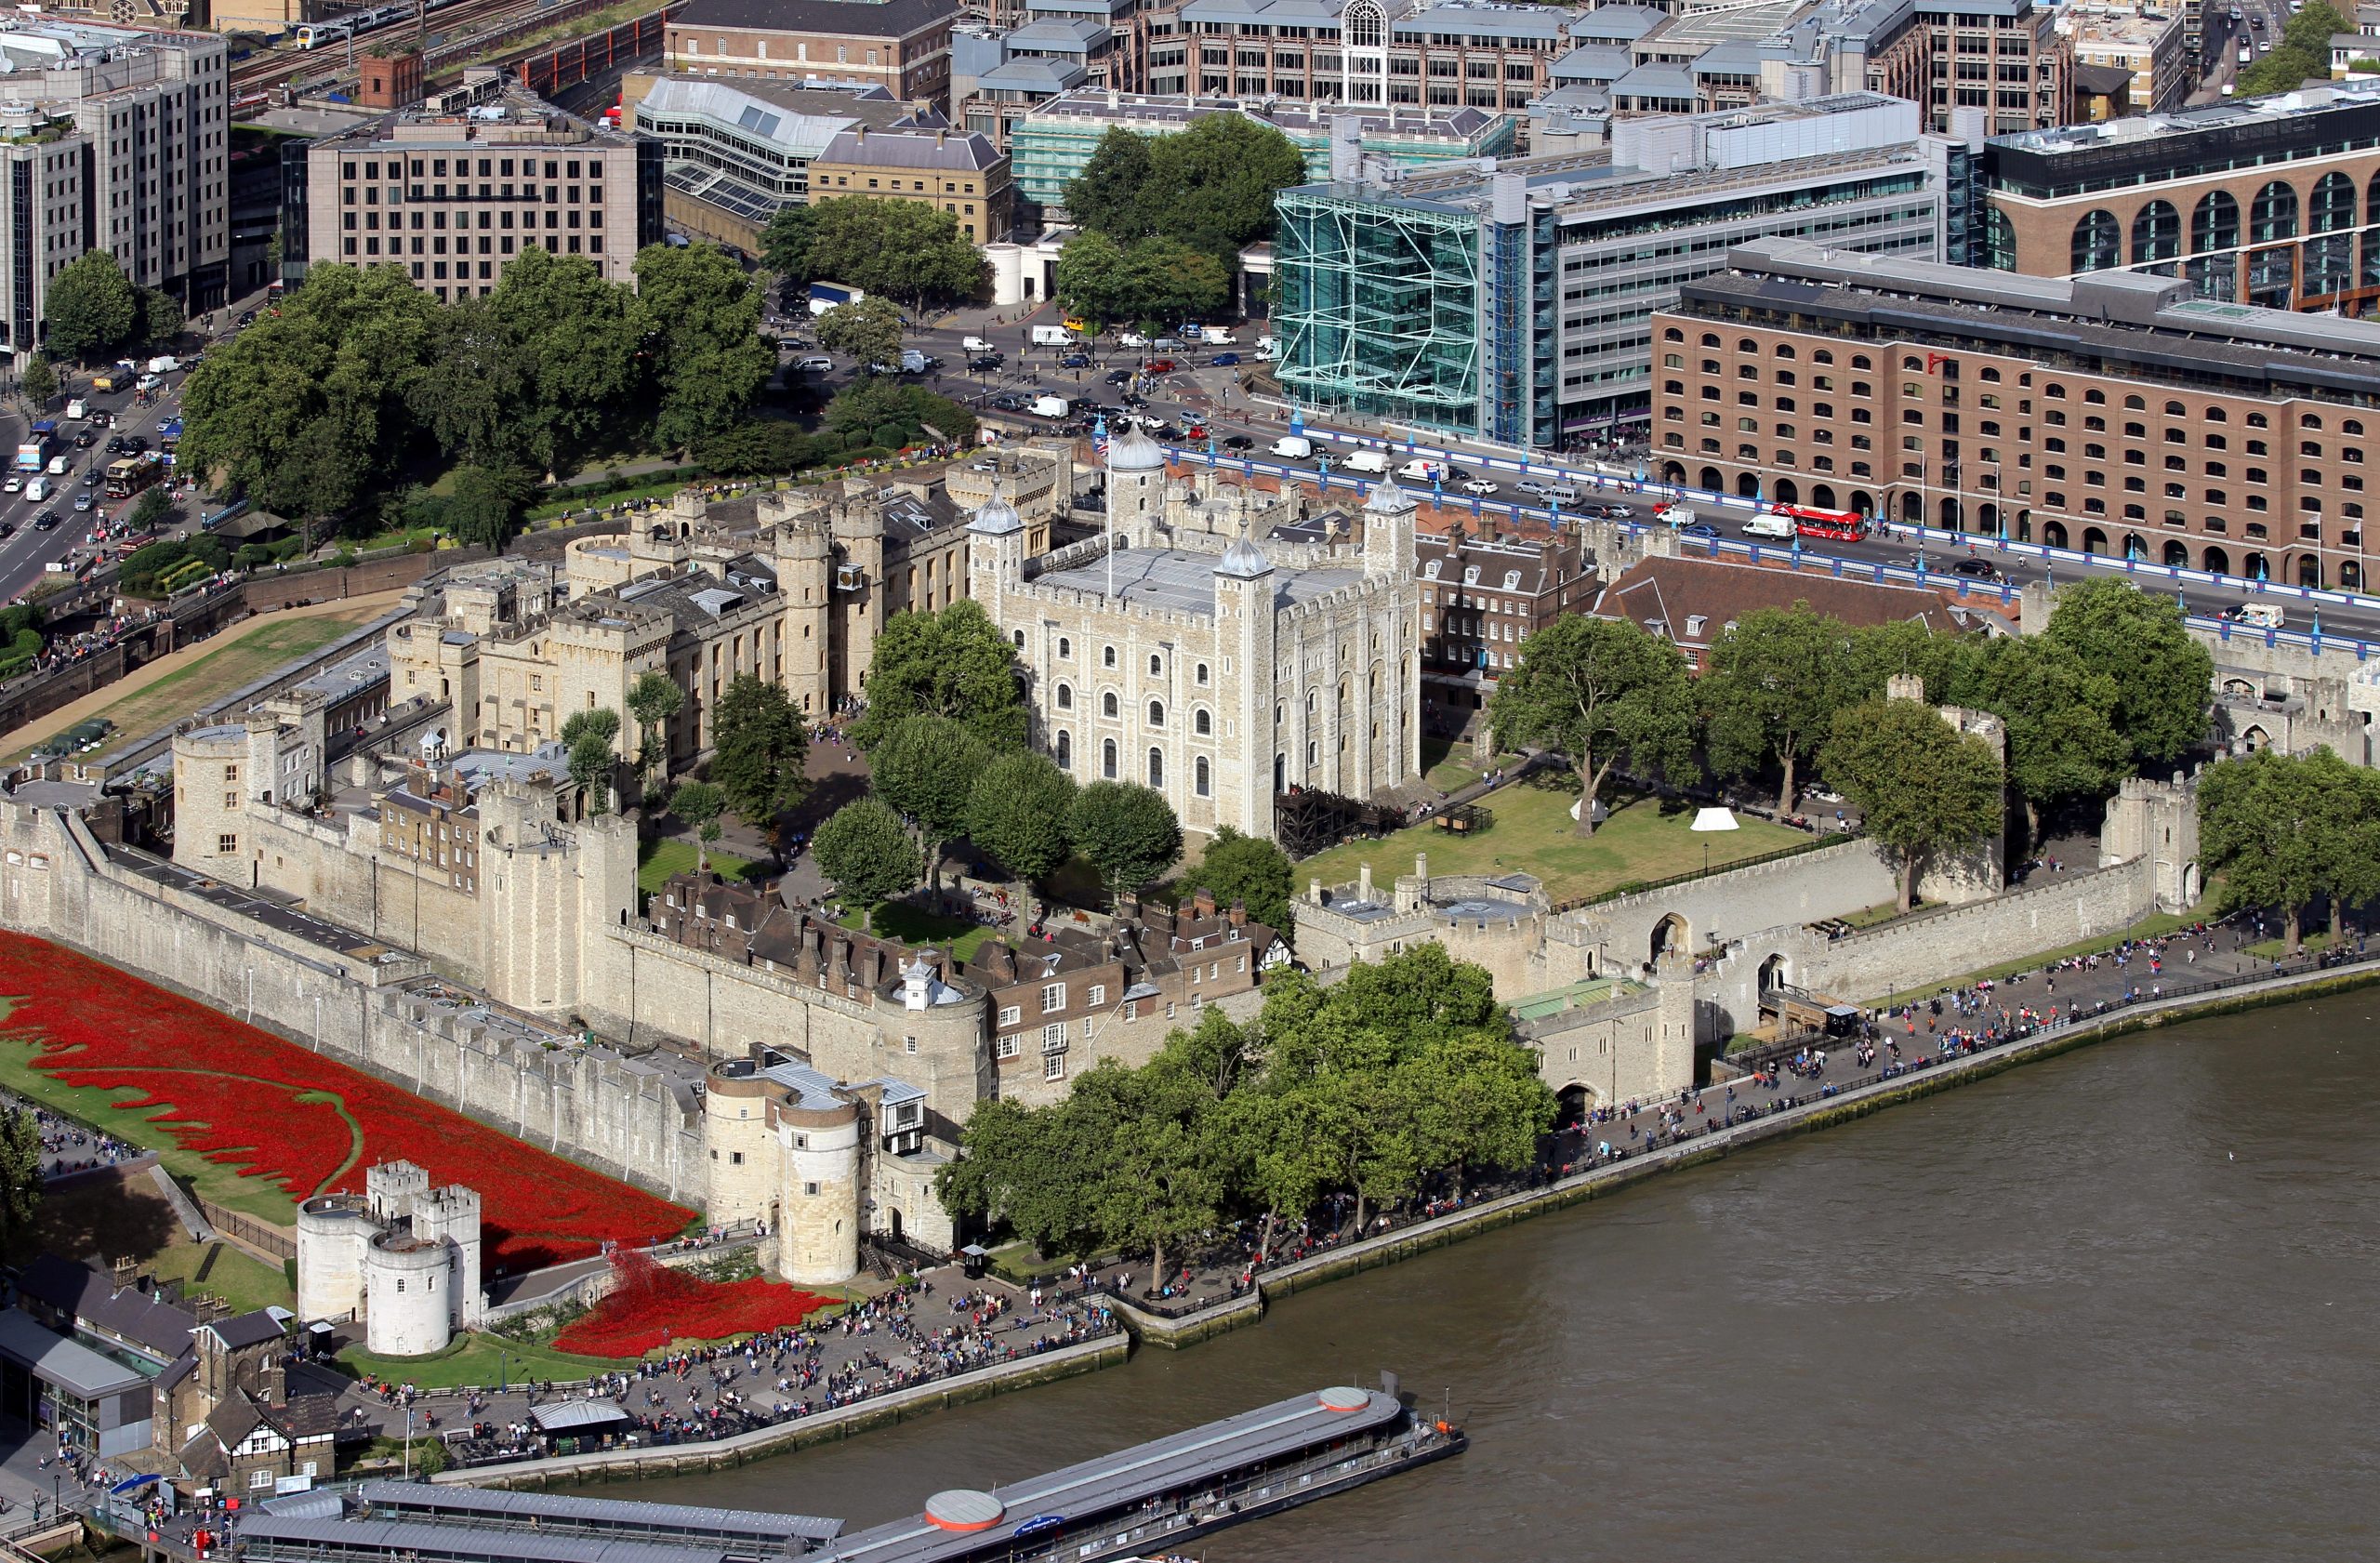 View of the Tower of London from The Shard, August 2014, UK. Blood Swept Lands and Seas of Red was a public installation created to commemorate the centenary of the outbreak of World War 1 and consisted of 888 246 ceramic red poppies, to represent one British or Colonial serviceman killed in the war.